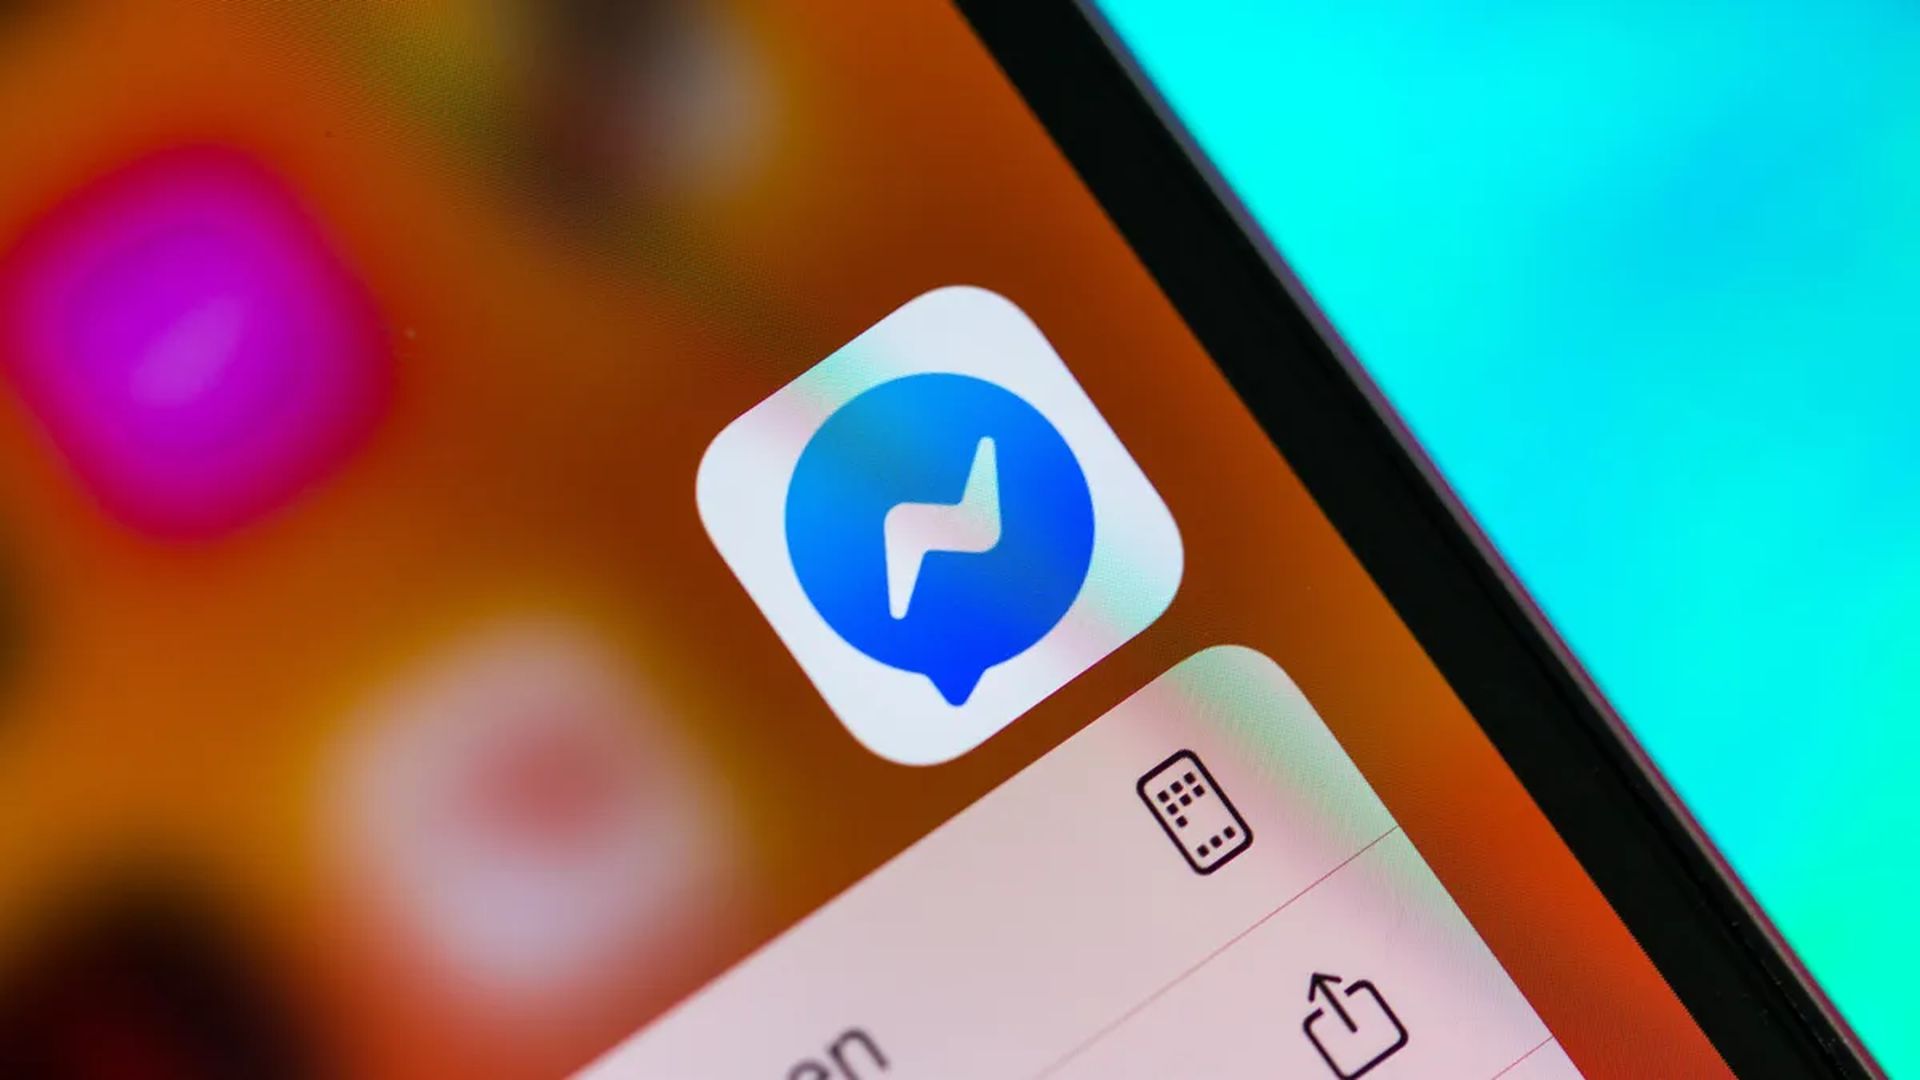 In this article, we are going to be covering how to fix Facebook Messenger effects not working, so you can continue using Messenger without further issues.